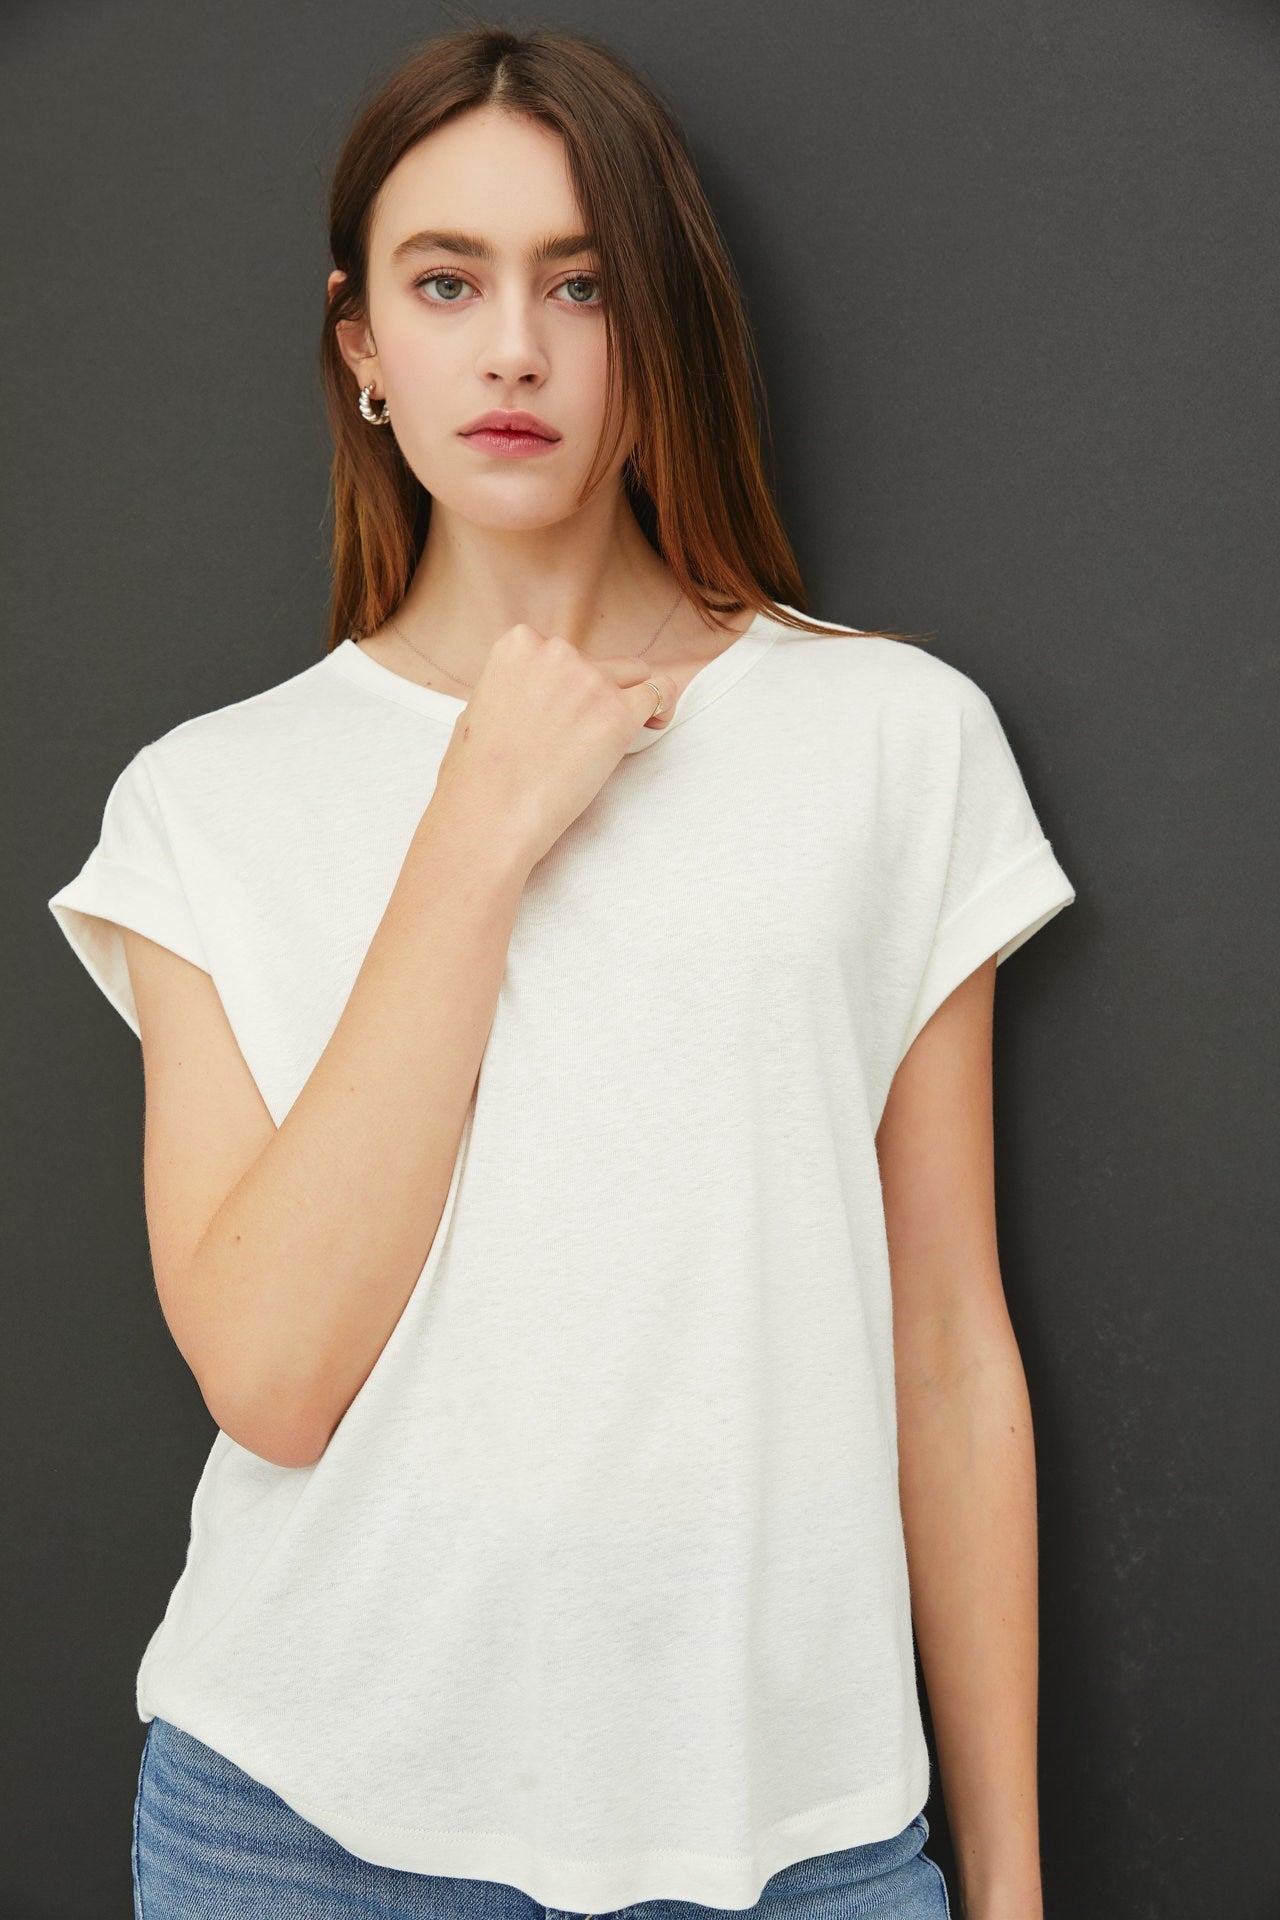 Linen Rolled Sleeve Muscle Tee